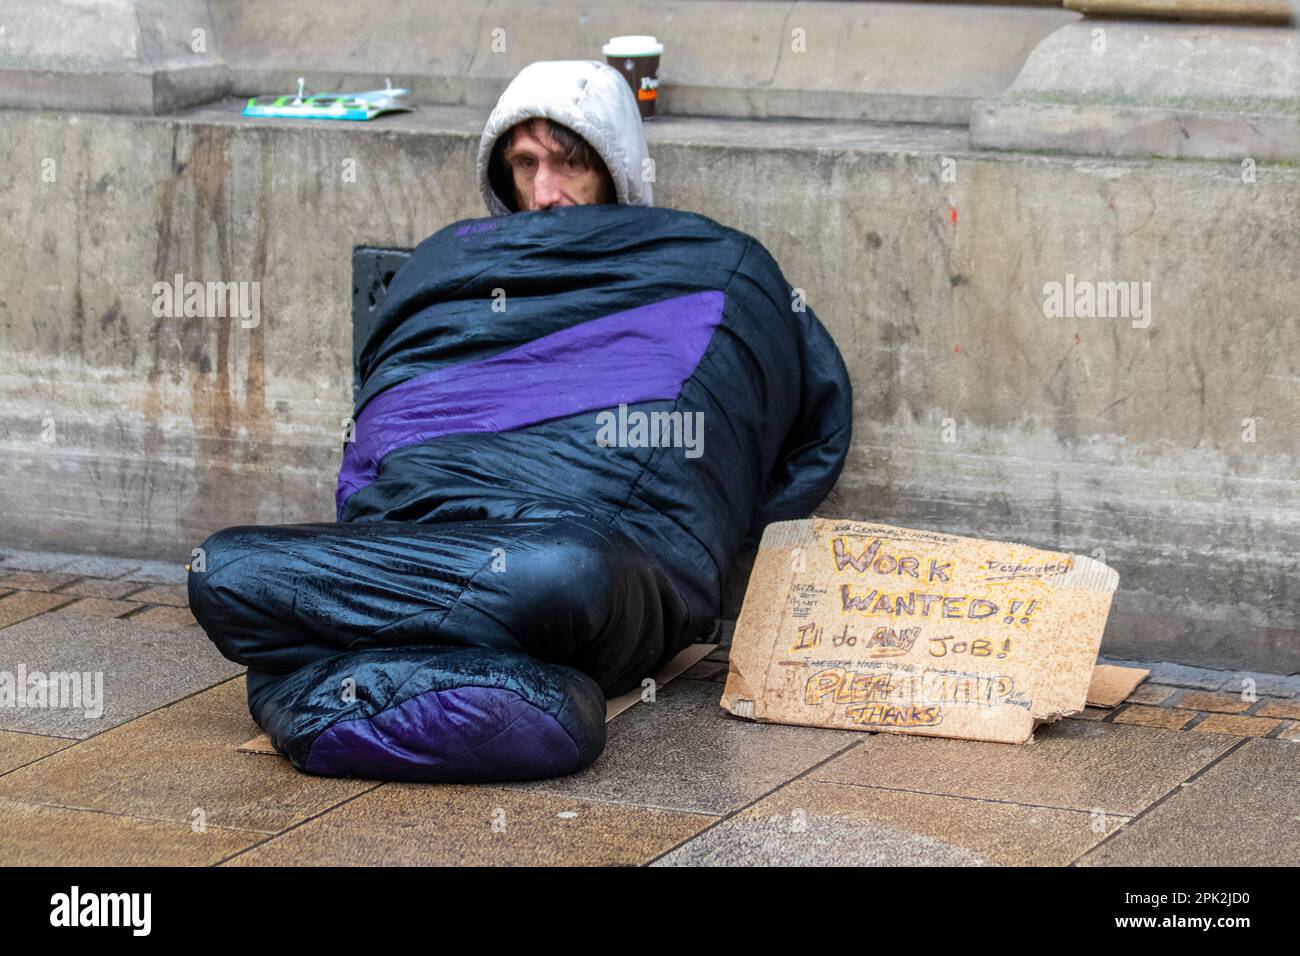 PRESTON, Lancashire.  Uk Weather. Homeless people,  Shops, shoppers on a rainy day in the city centre.  Outbreaks of rain pushing eastwards but gradually clearing from the northwest. Credit MediaWorldImages/AlamyLiveNews Stock Photo